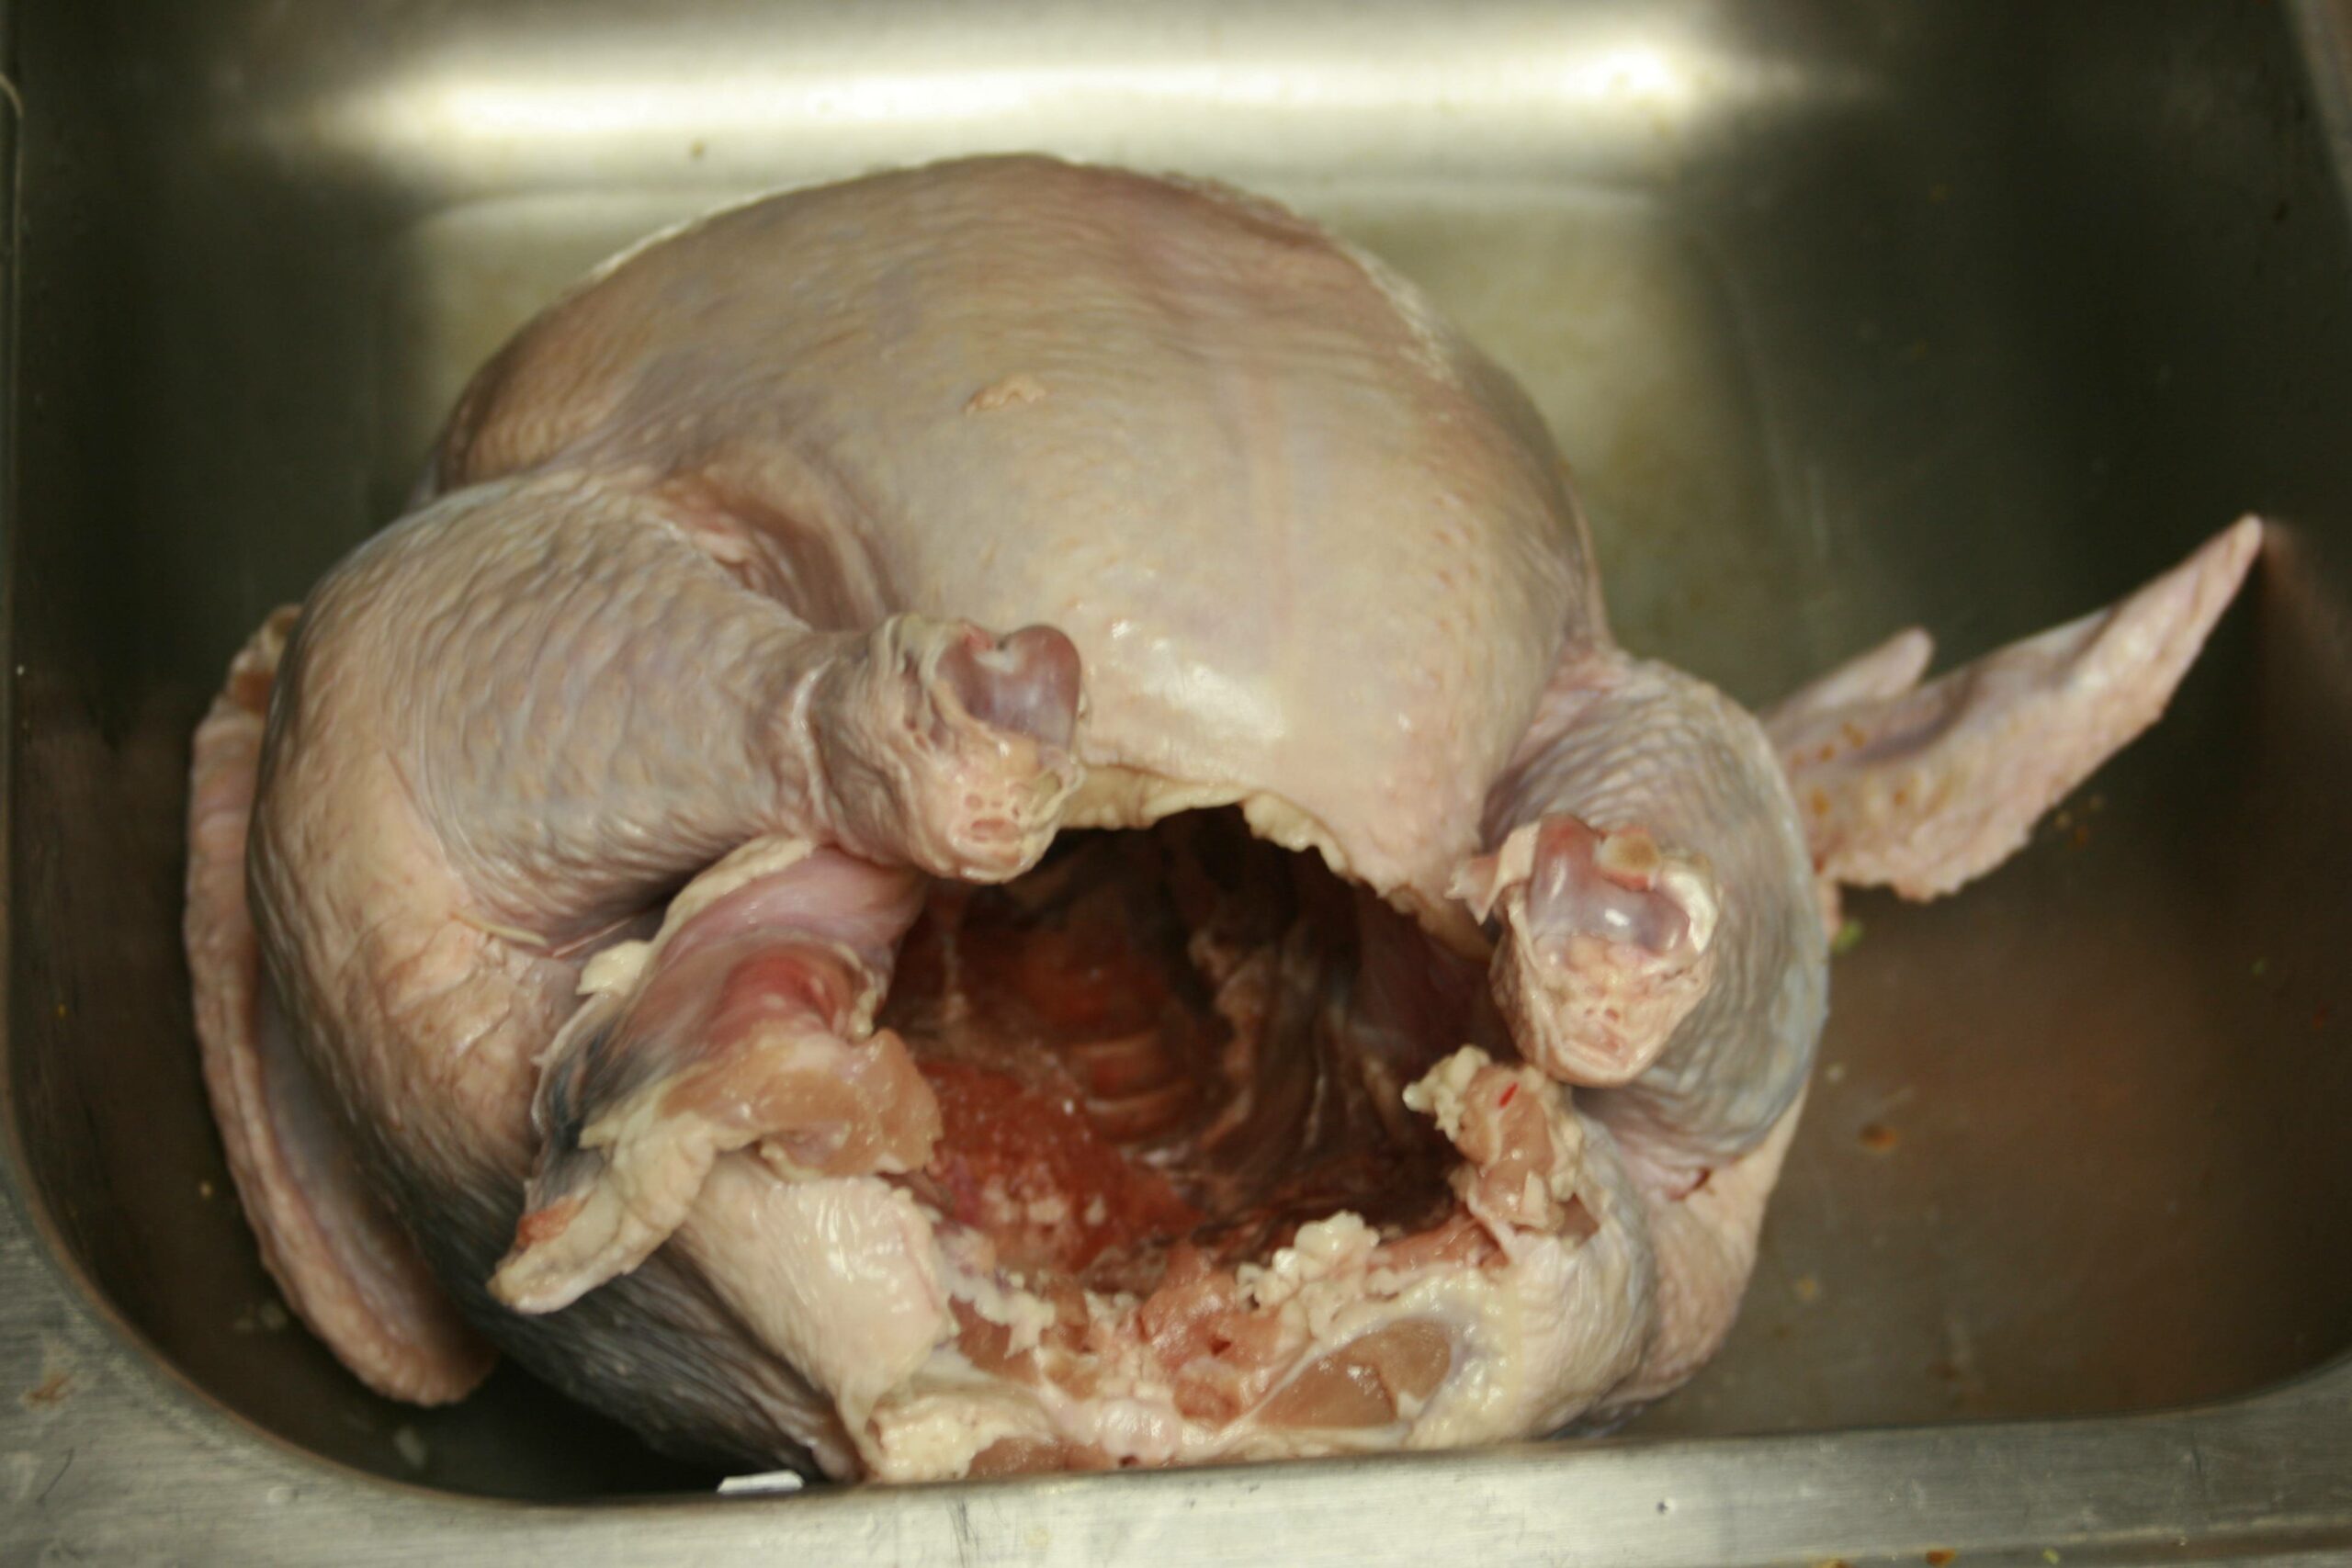 How to avoid giving food poisoning to your holiday guests